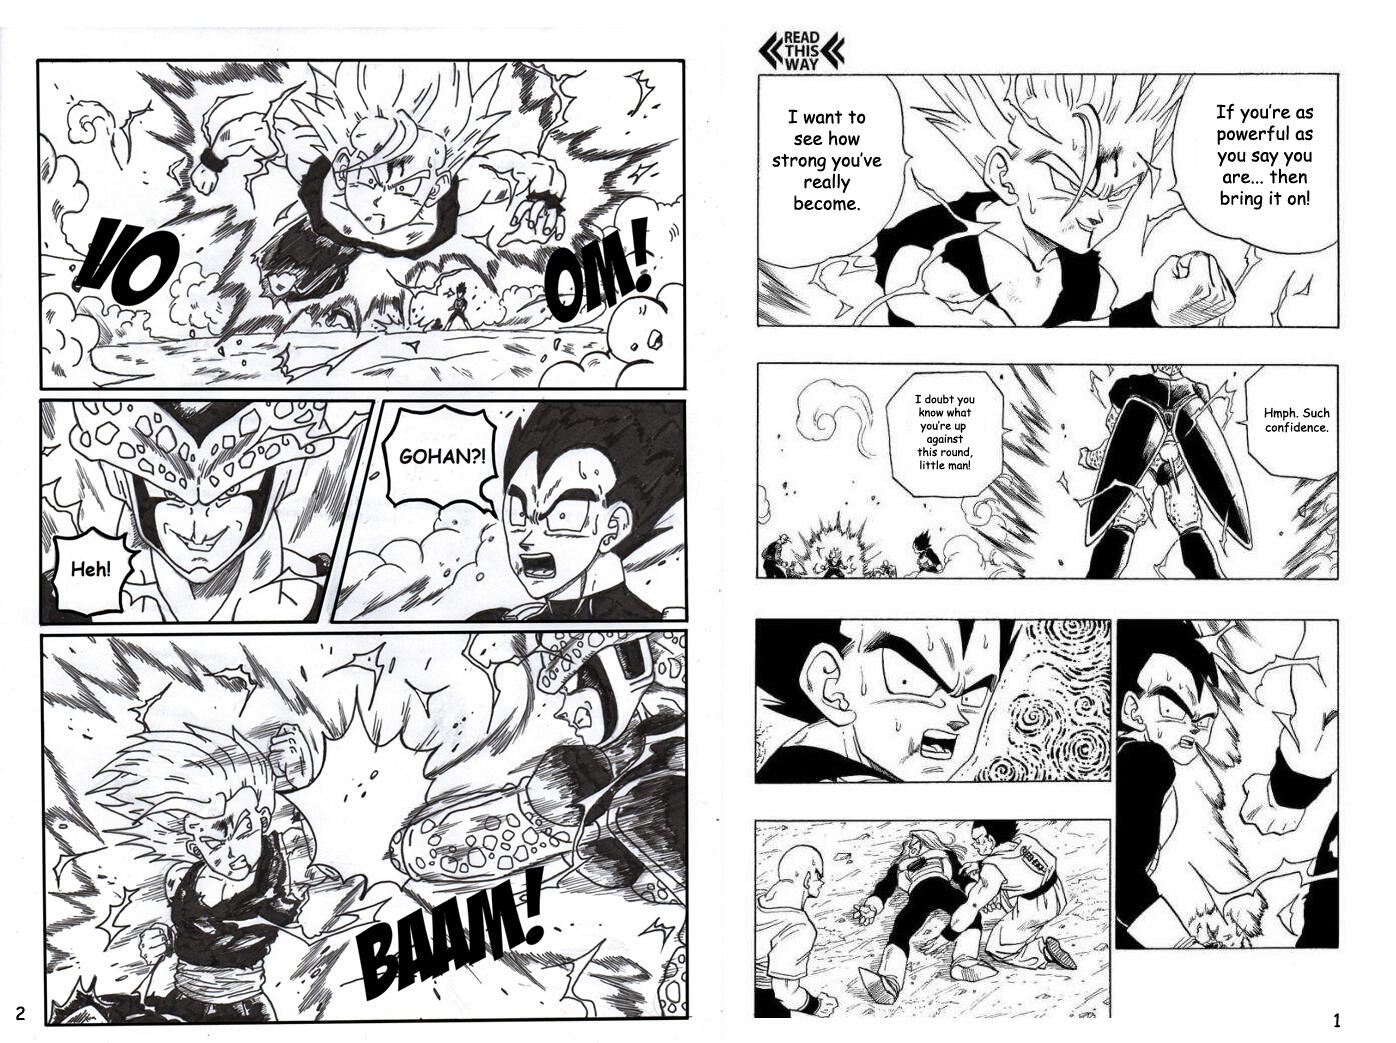 The Golden Age Chapter 1 Dragonball Z Golden Age - Chapter 1 - Prologue